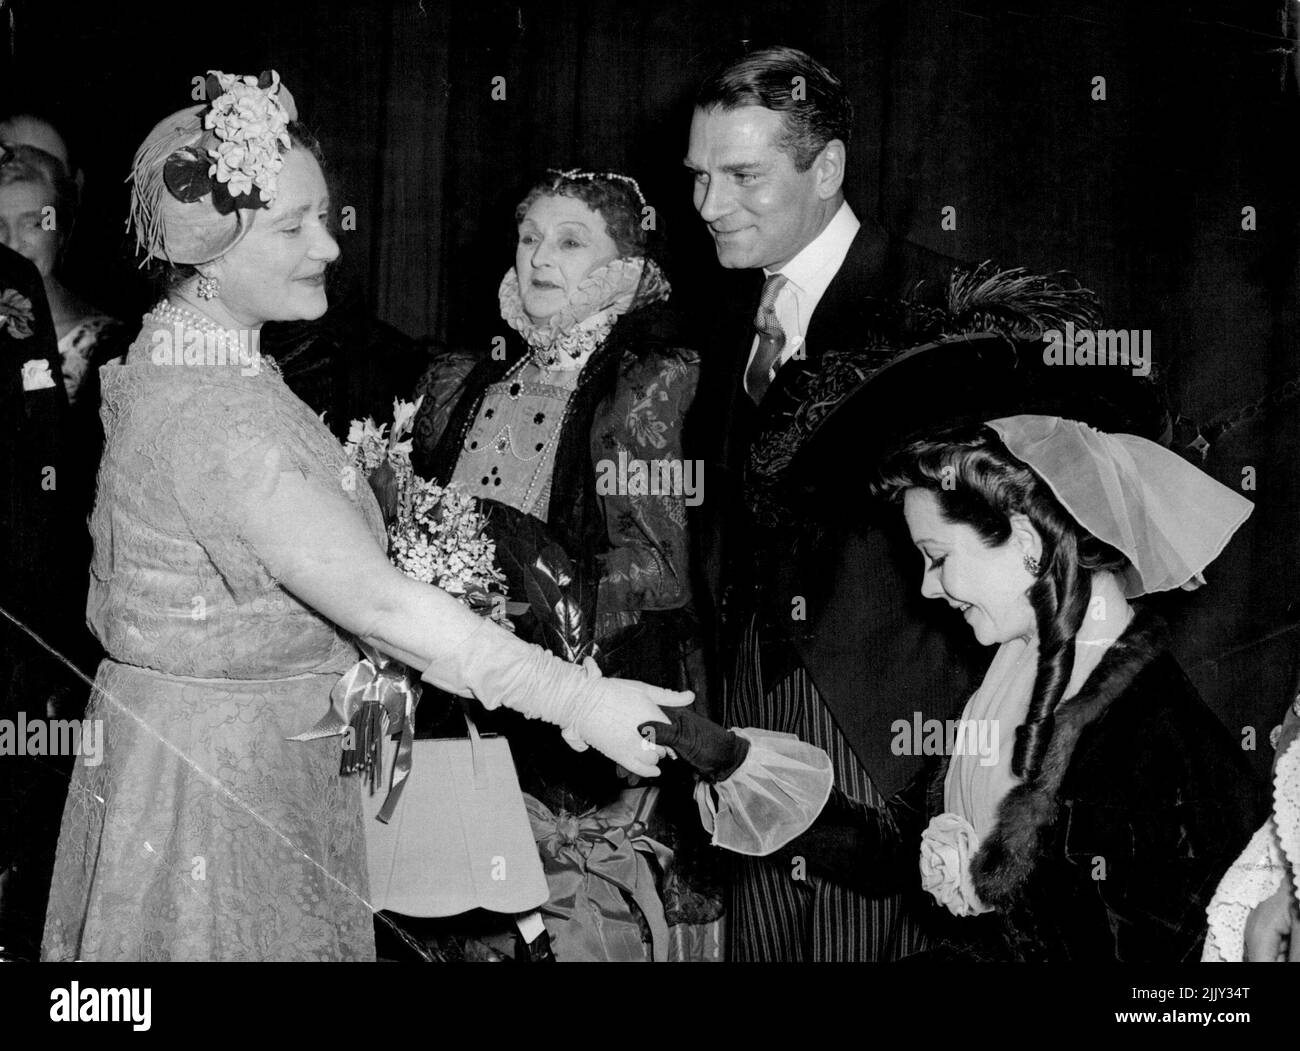 Curtsey For the Queen Mother - Still in costume, actress Vivien Leigh curtsey to Queen Elizabeth, the Queen Mother, at the Variety Club's all-star matinee at Her Majesty's Theatre in the Haymarket, London, to-day (Monday). Next to Vivien Leigh are her husband Sir Laurence Oliveier, and Dame Sybil Thornduke. The matinee commemorated three anniversaries - the fiftieth year since the founding of the Royal Academy of Dramatic Art; Dame Sybil's golden jubilee on the stage; and the birth centanary of Sir Herbert Beerbohm Tree, founder of the PADA. May 31, 1954. (Photo by Reuterphoto). Stock Photo